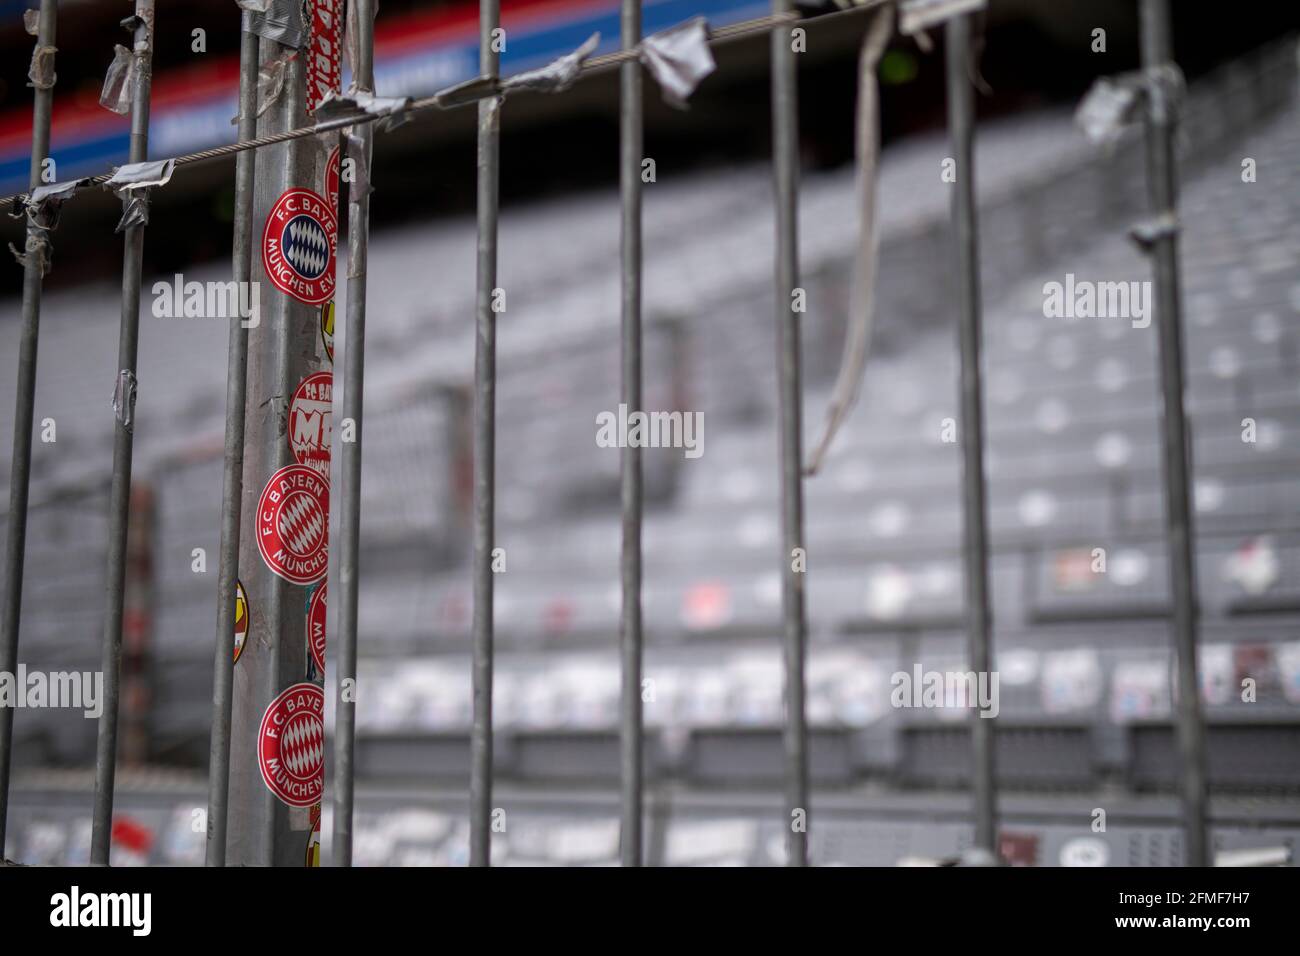 Fankurve in the match FC BAYERN MUENCHEN - BORUSSIA MOENCHENGLADBACH 6-0 1.German Football League on May 8, 2021 in Munich, Germany  Season 2020/2021, matchday 32, 1.Bundesliga, FCB, München, 32.Spieltag, © Peter Schatz / Alamy Live News / Moritz Müller/Pool   - DFL REGULATIONS PROHIBIT ANY USE OF PHOTOGRAPHS as IMAGE SEQUENCES and/or QUASI-VIDEO - Stock Photo